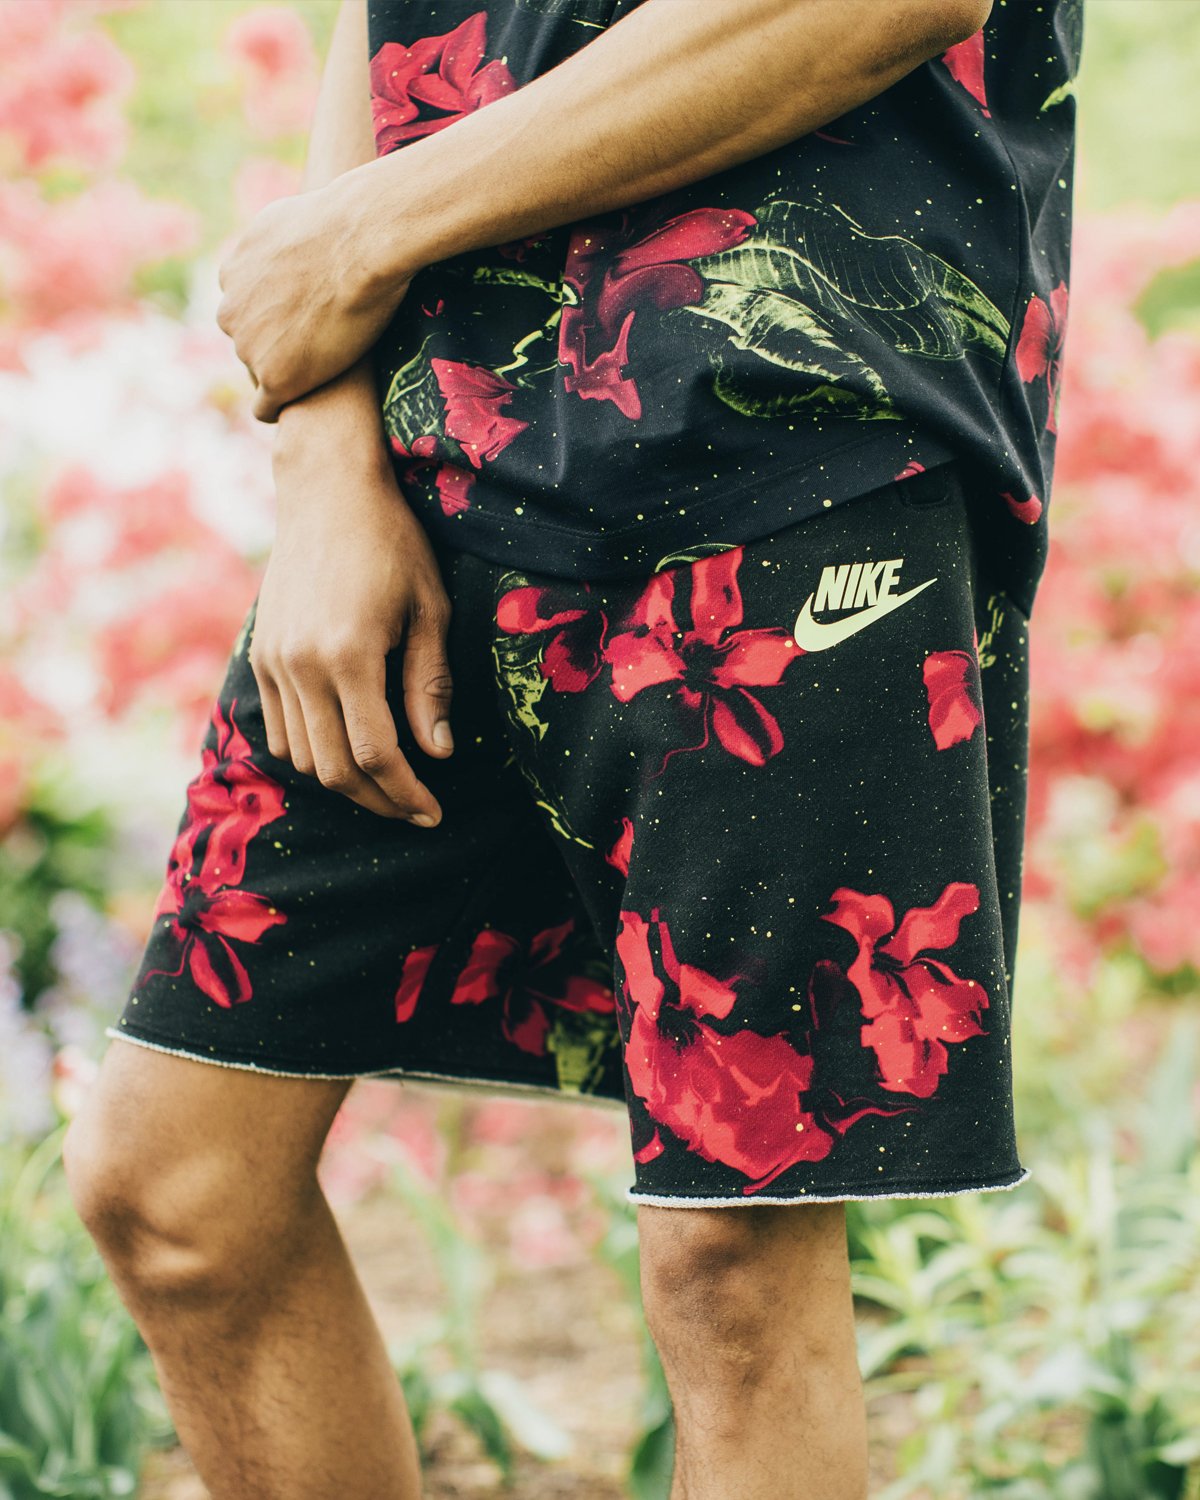 manejo Fanático Leve DTLR on Twitter: "The #Nike Sports Wear Floral Fleece shorts and Tee are  now available in-store and online. Tee: https://t.co/17U1IeO2Xw Shorts:  https://t.co/DpnL9NHucb https://t.co/g7QVoAHoHt" / Twitter